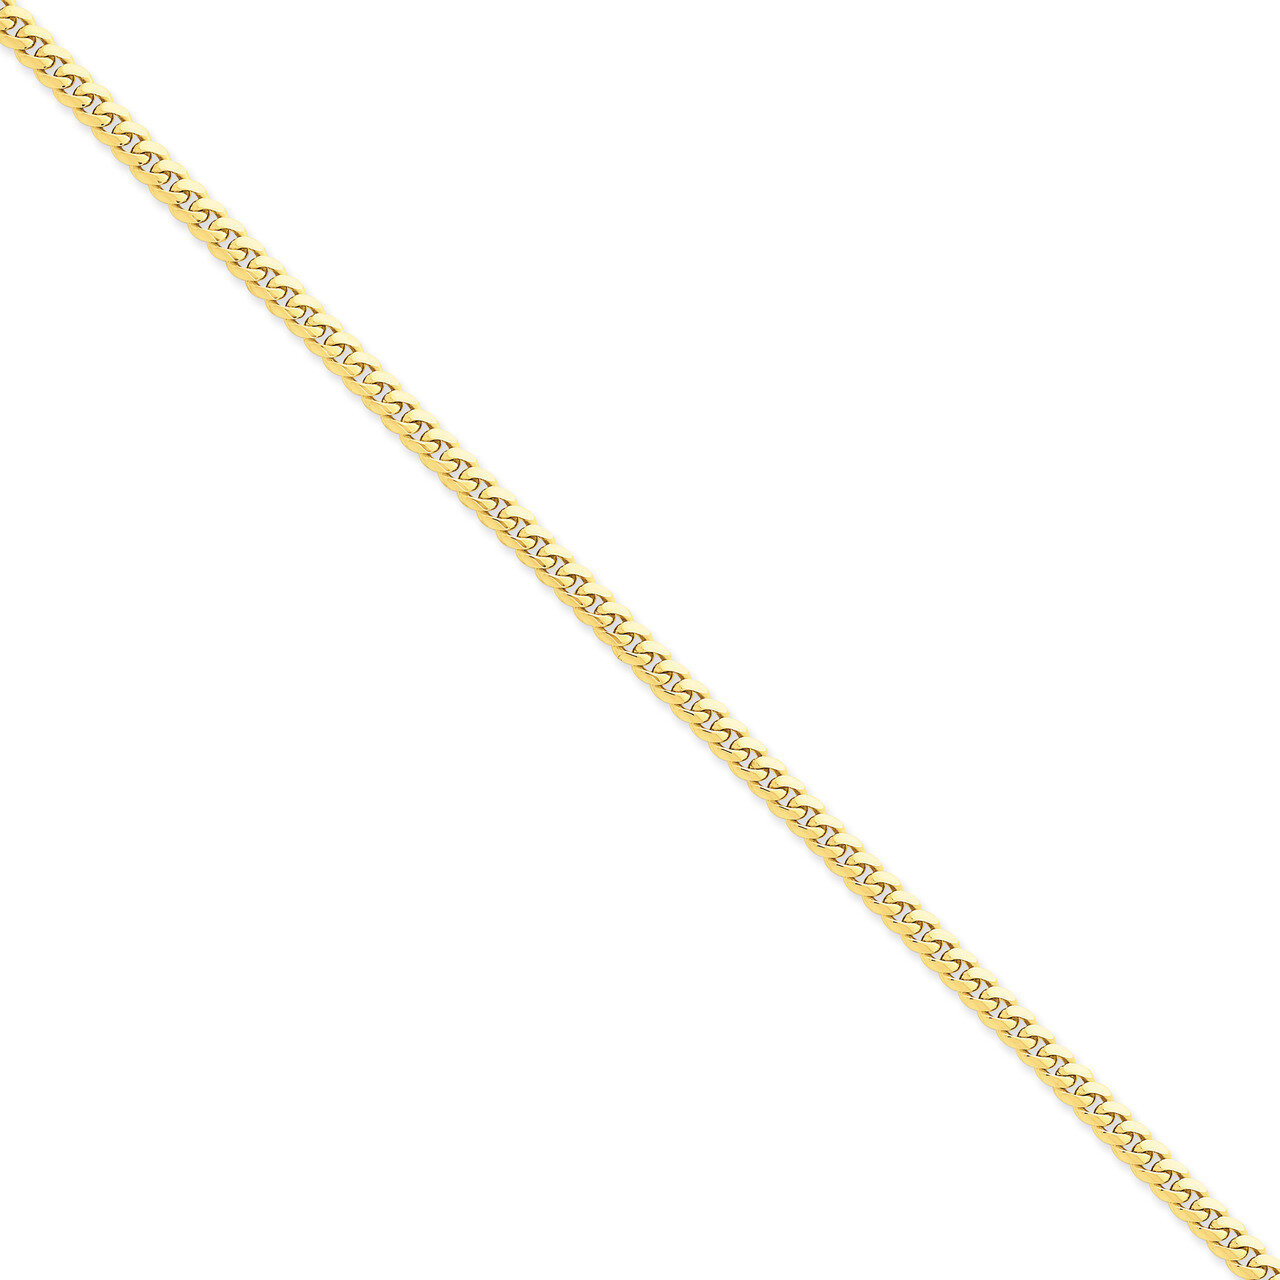 8 Inch 4.0mm Domed Curb Chain 14k Gold DCU120-8